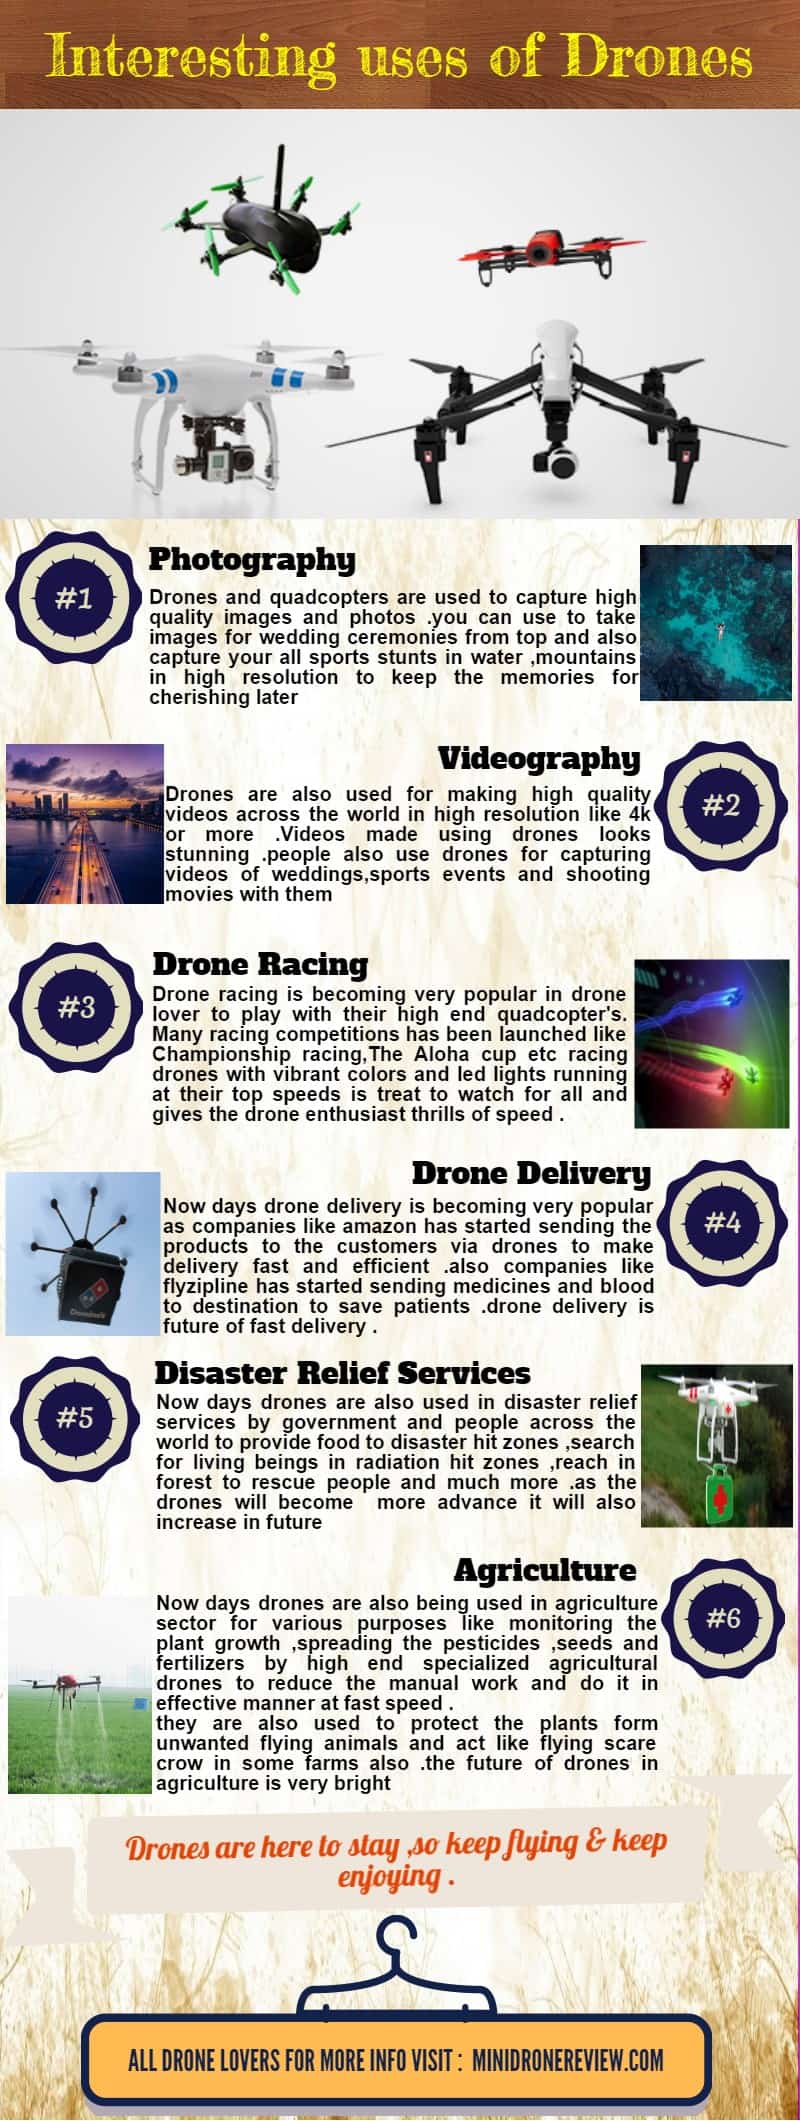 Interesting uses of drones